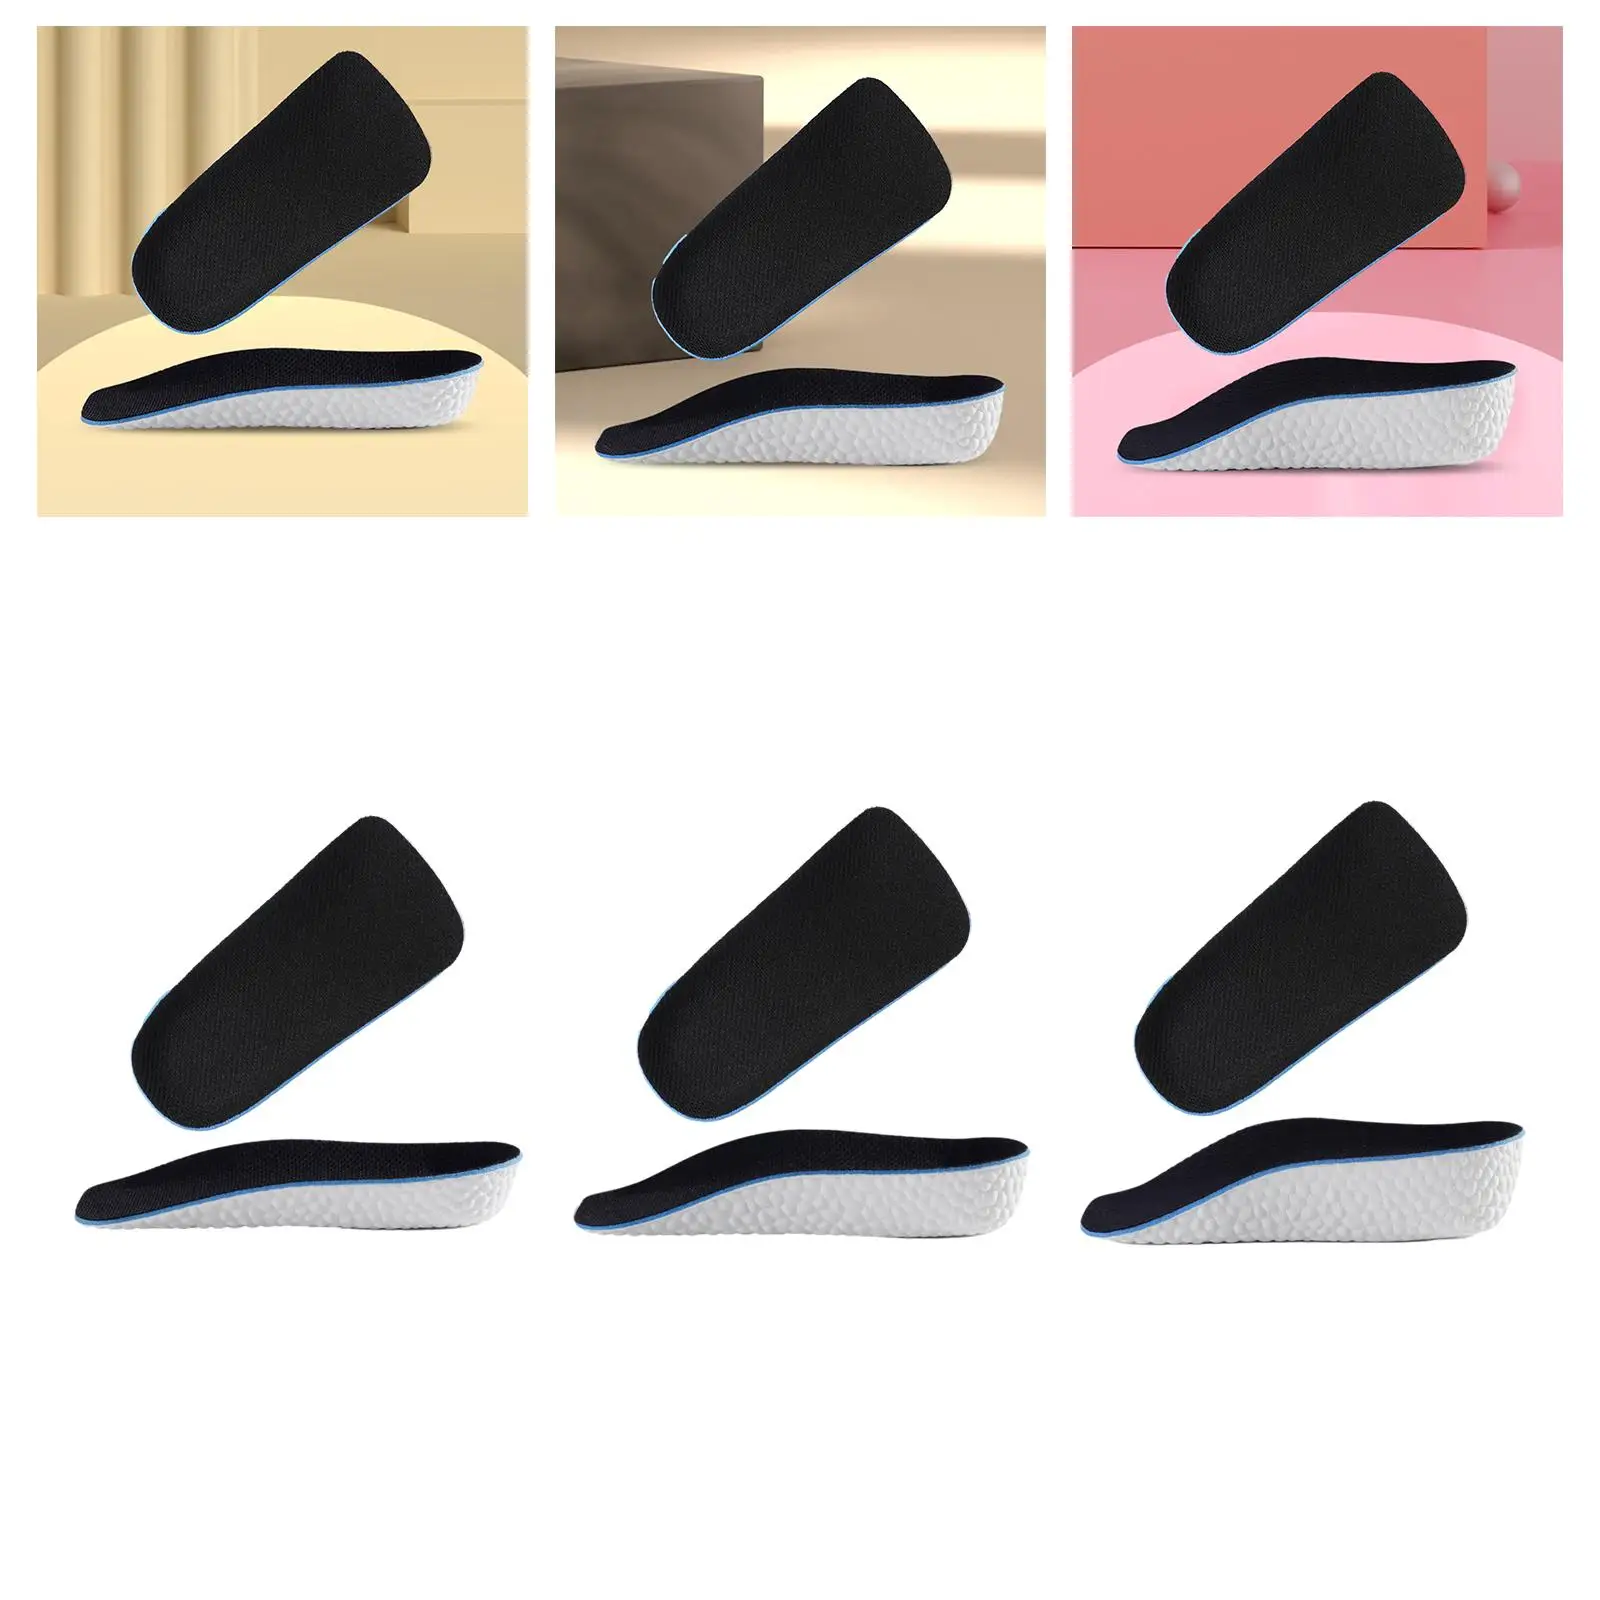 2Pcs Height Increase Insoles Absorb Sweat Anti Slip EVA Shock Absorption Arch Support Insert Cushion for Boots High Heels Hiking